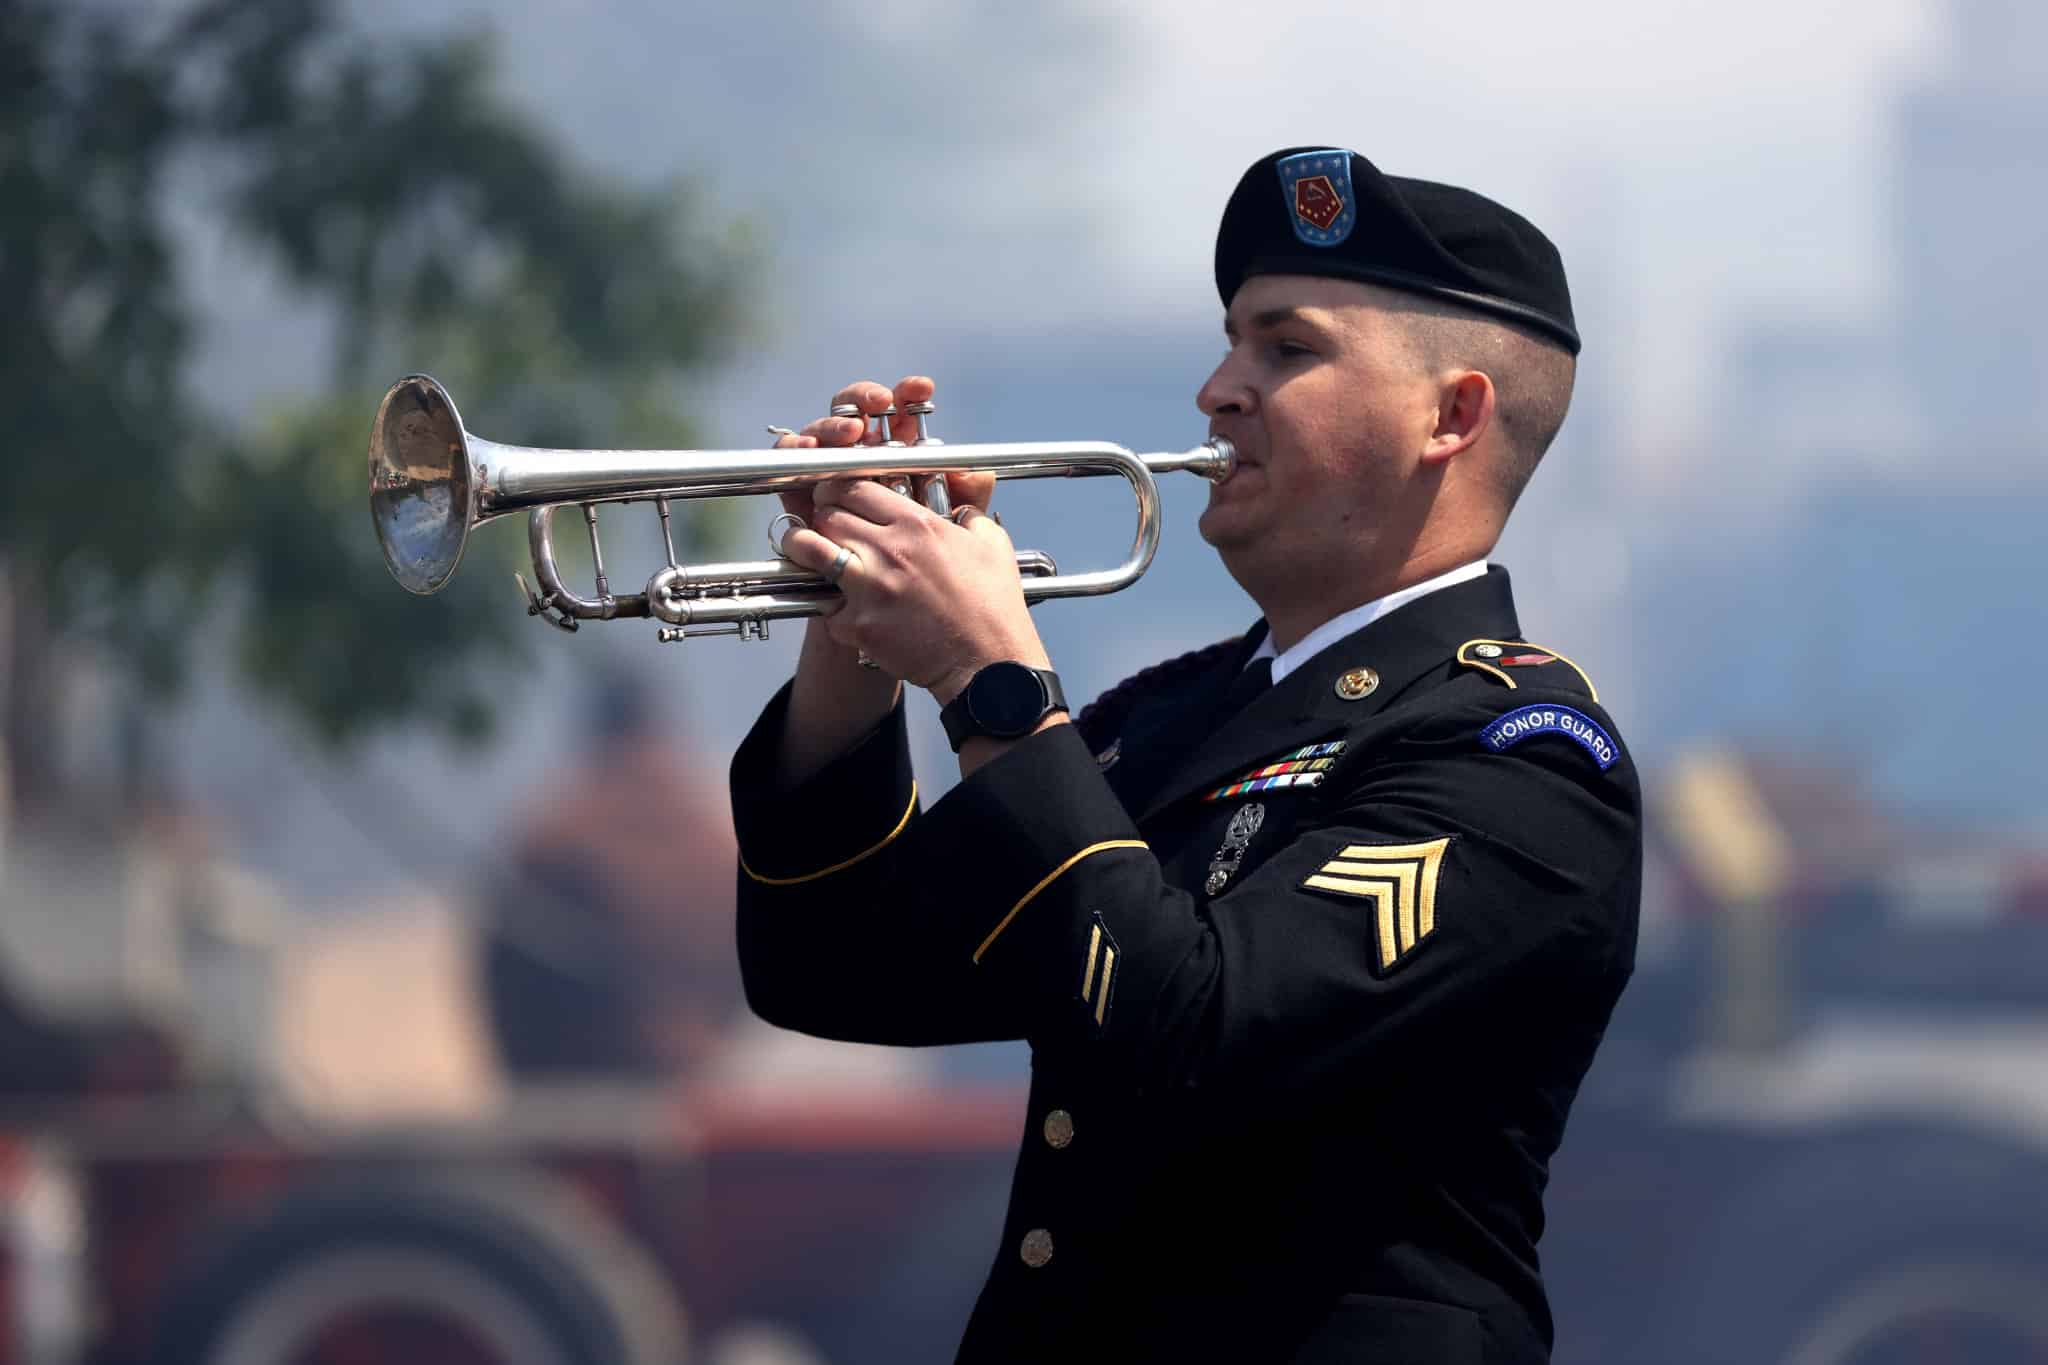 Boston, MA - May 25: A member of the armed forces plays Taps at the Fallen Heroes Memorial 8th Annual Rededication Ceremony. (Photo by Jonathan Wiggs/The Boston Globe via Getty Images)